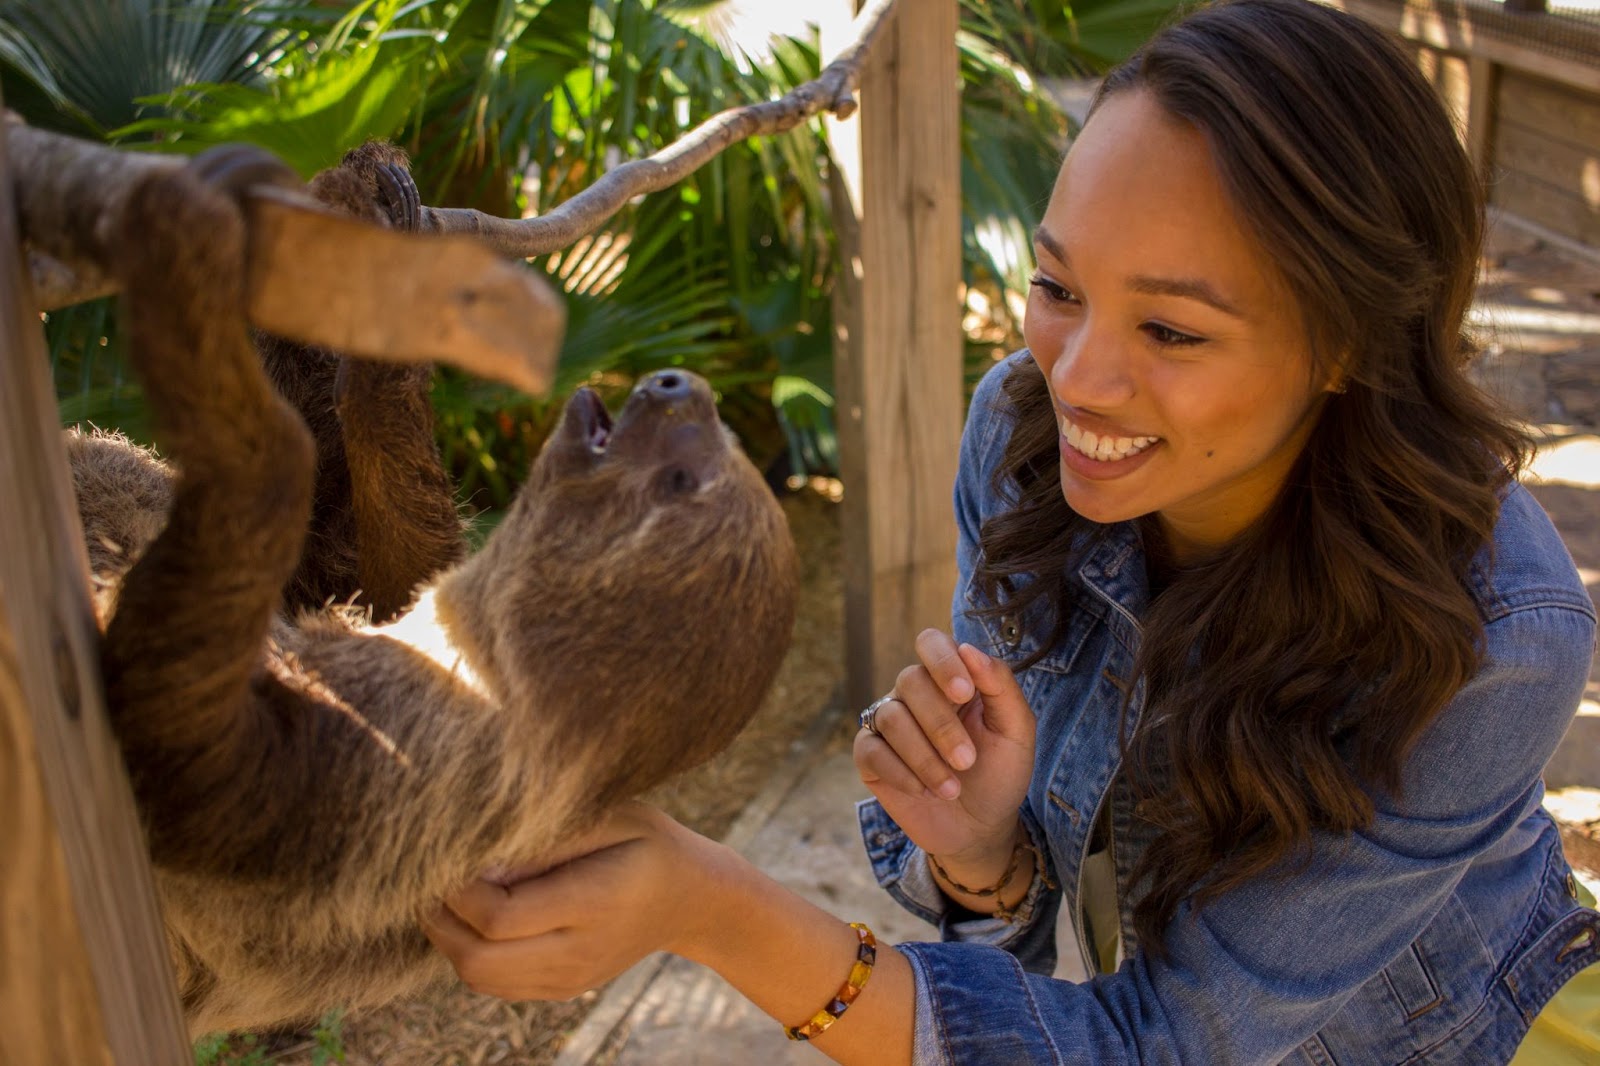 A woman gets to pet a sloth at Wild Florida's Gator Park